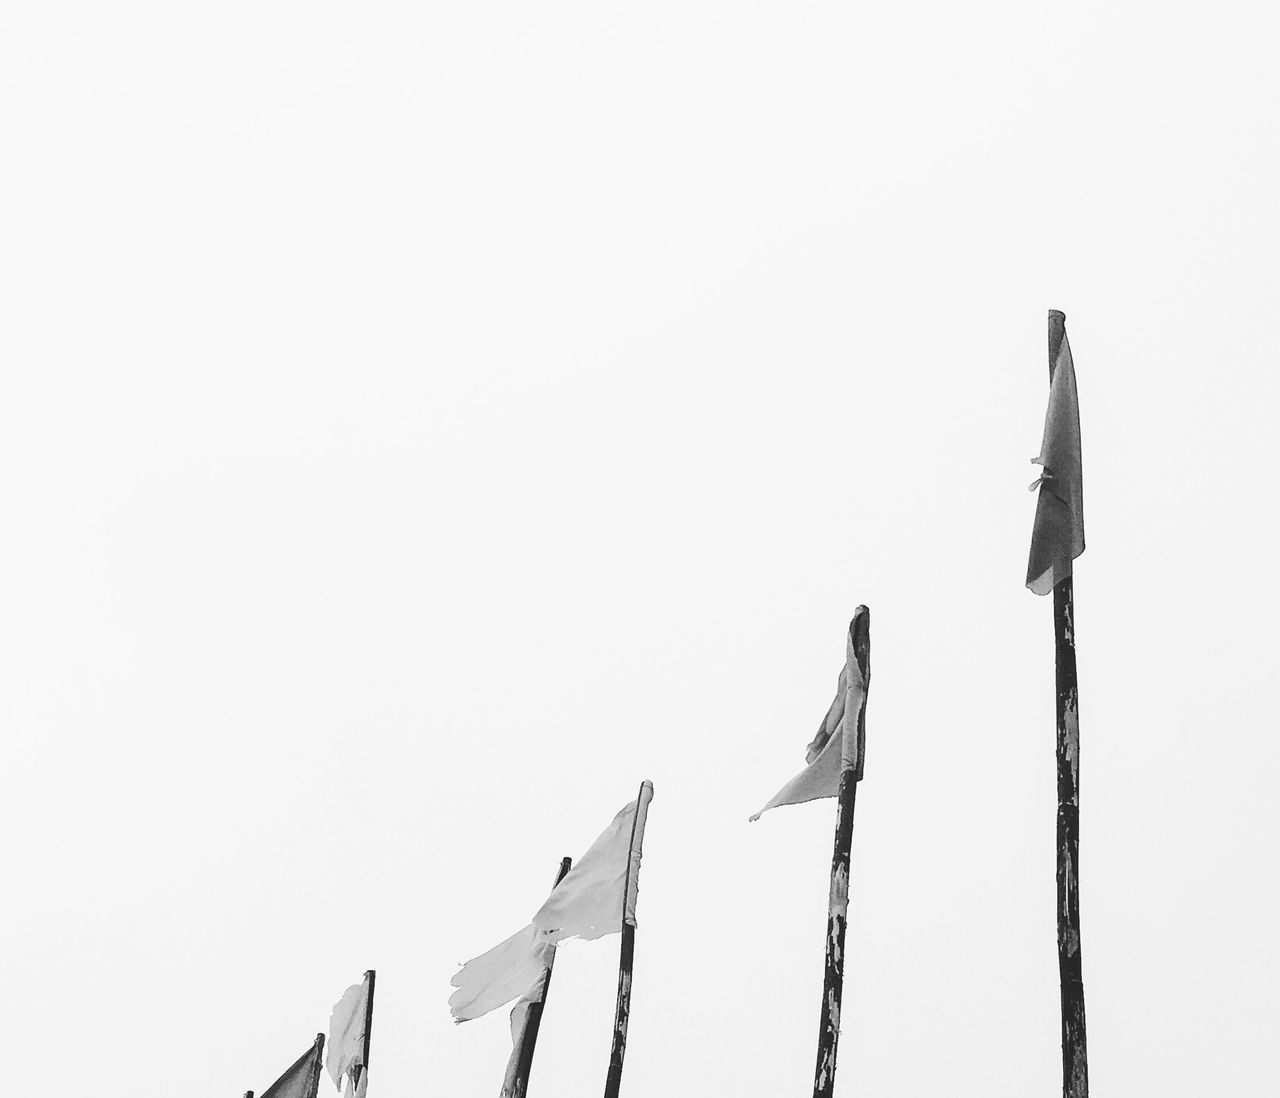 LOW ANGLE VIEW OF FLAGS AGAINST SKY